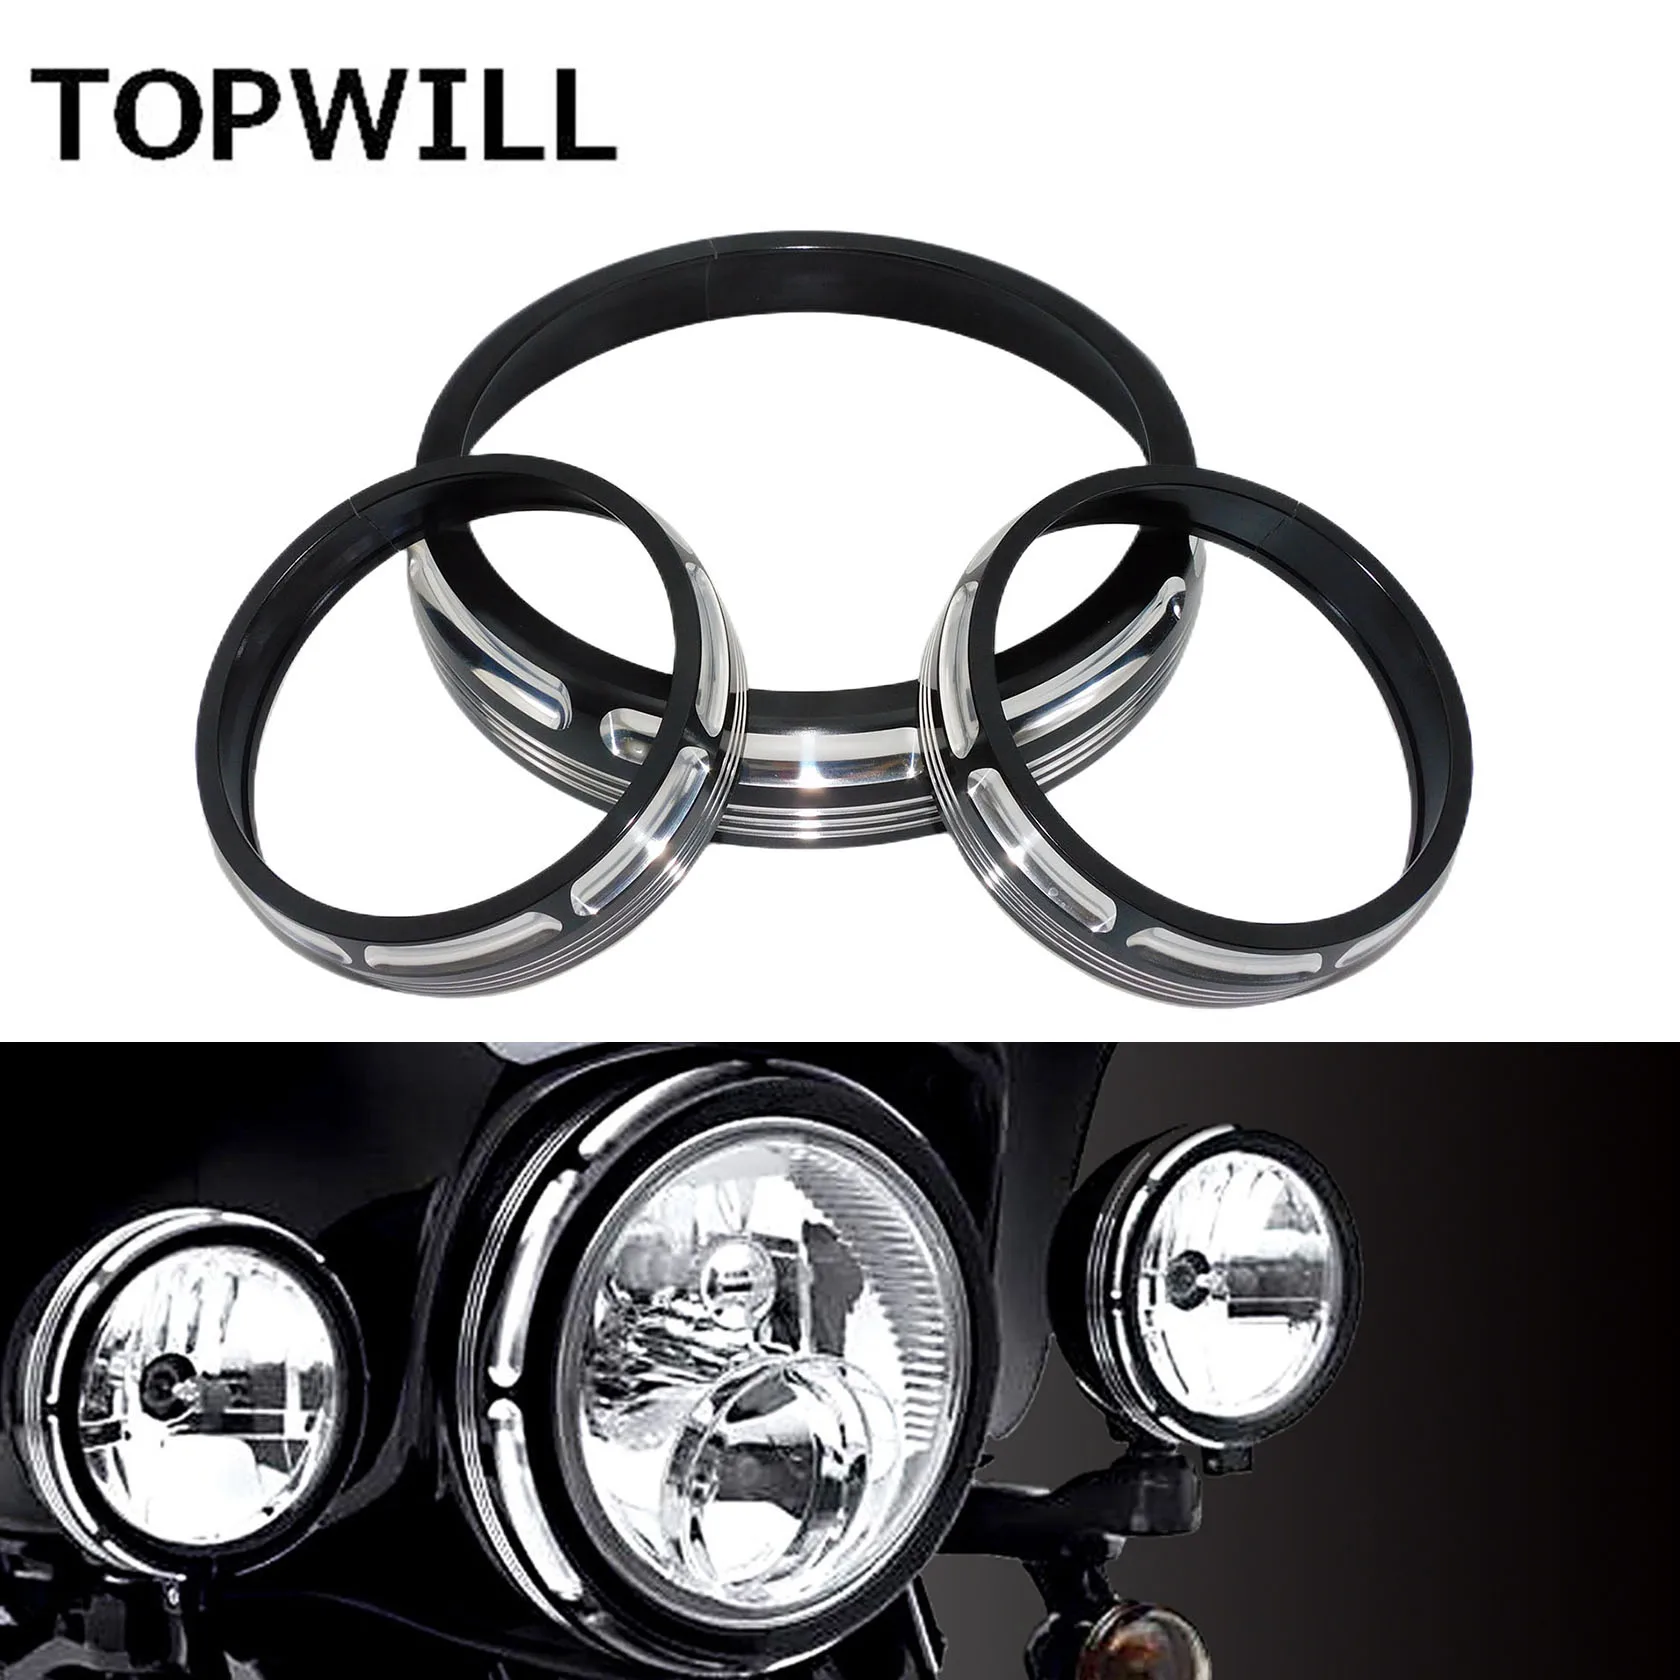 

Motorcycle 7" Headlamp Trim Ring 4 1/2" Auxiliary Lighting Headlight Cover For Harley Touring Road King Street Electra 1996-Up